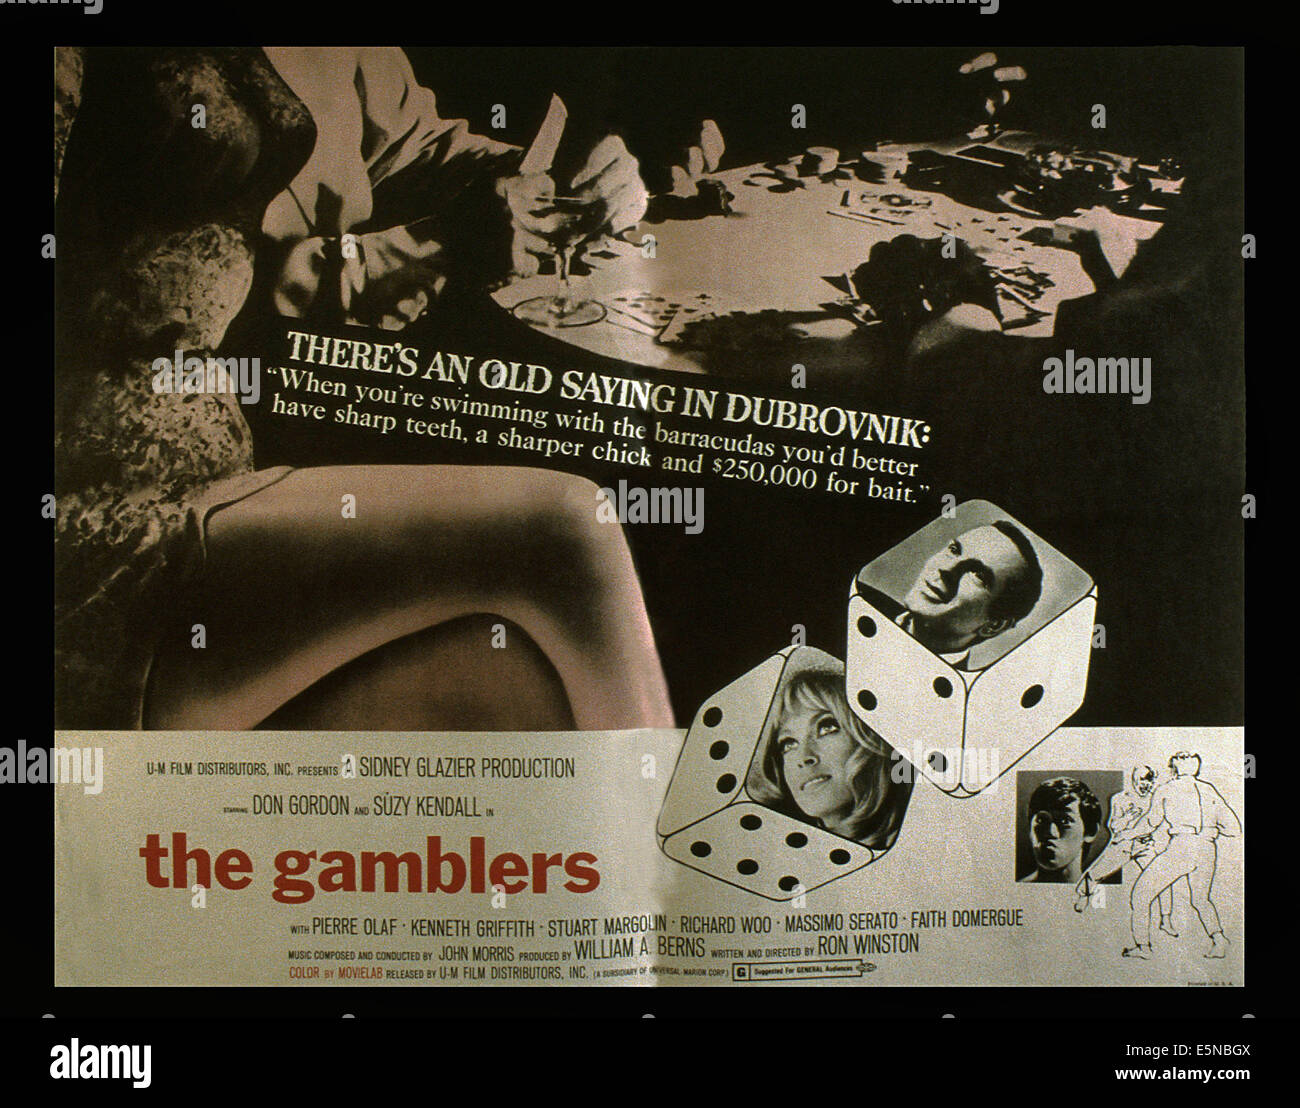 THE GAMBLERS, from left: Suzy Kendall, Don Gordon, Richard Woo, 1970 Stock Photo